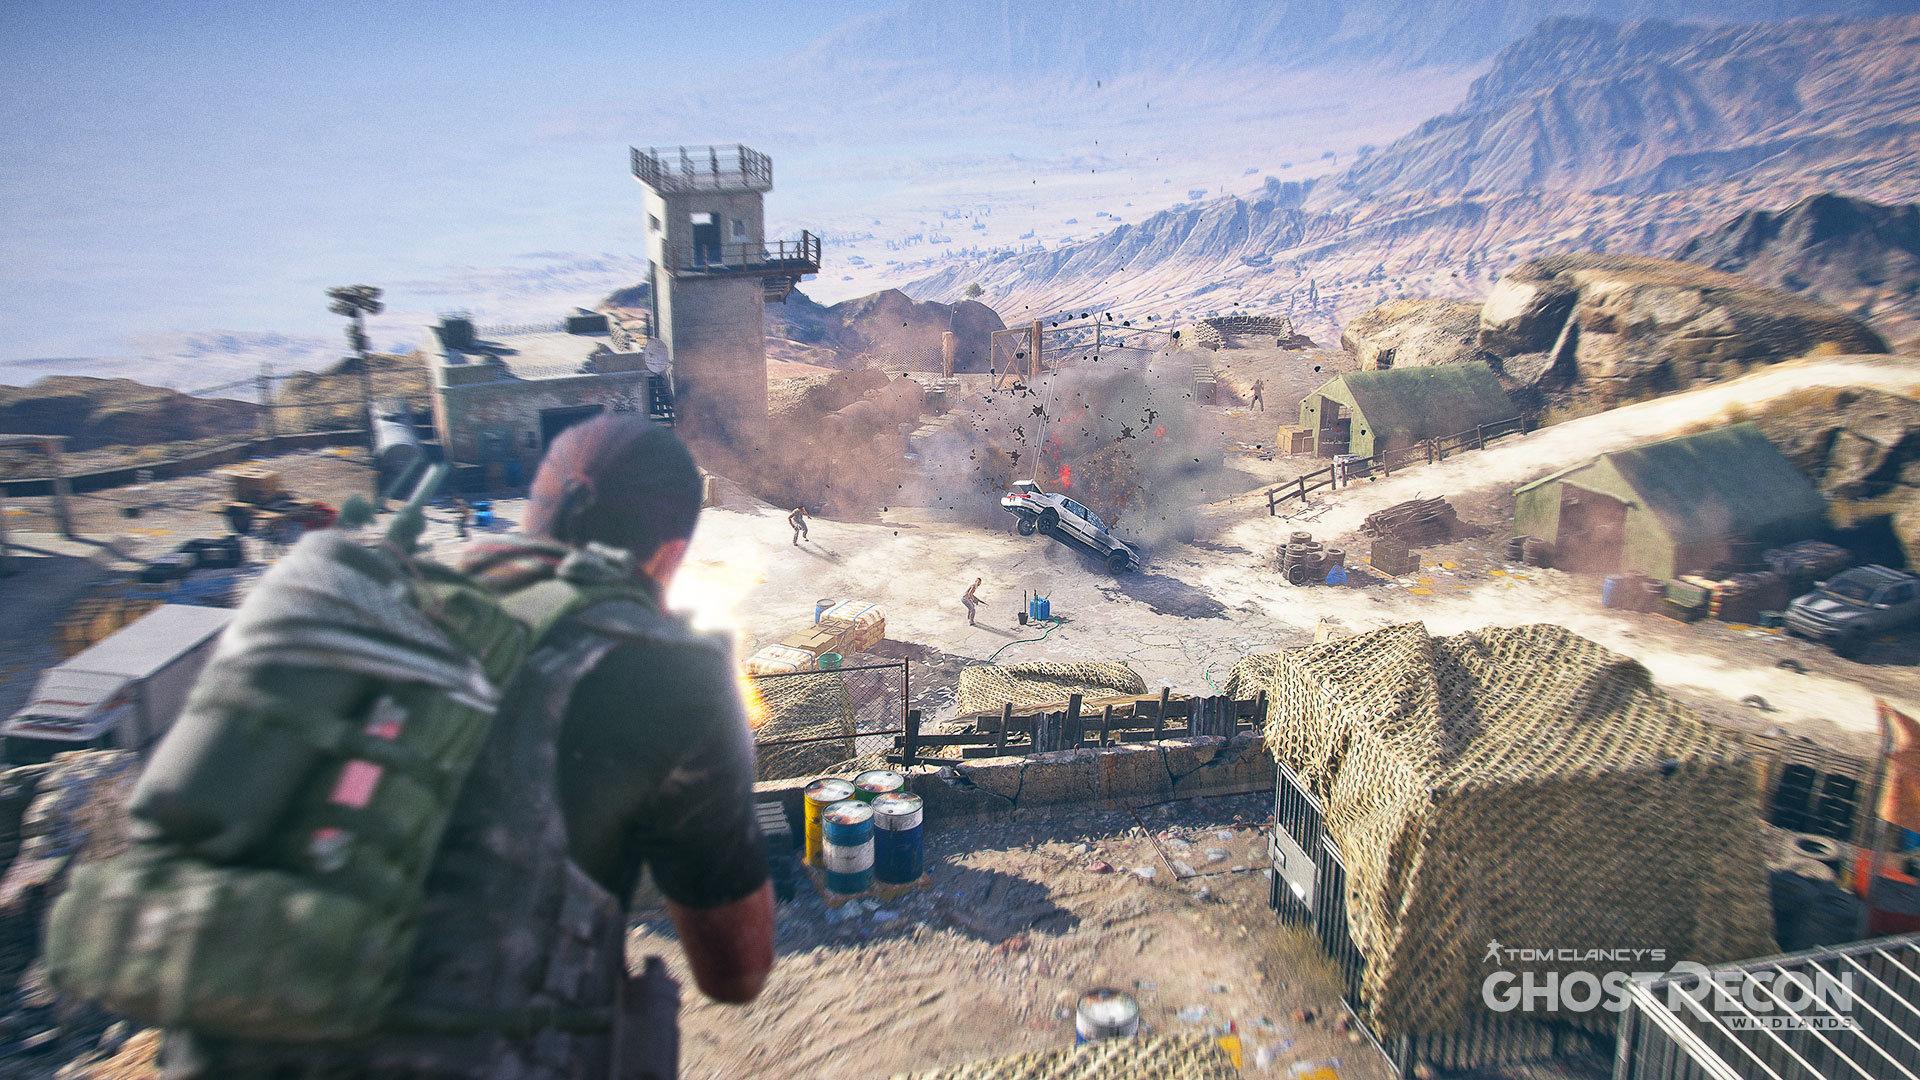 Ghost Recon: Wildlands' $40 season pass packs two big expansions